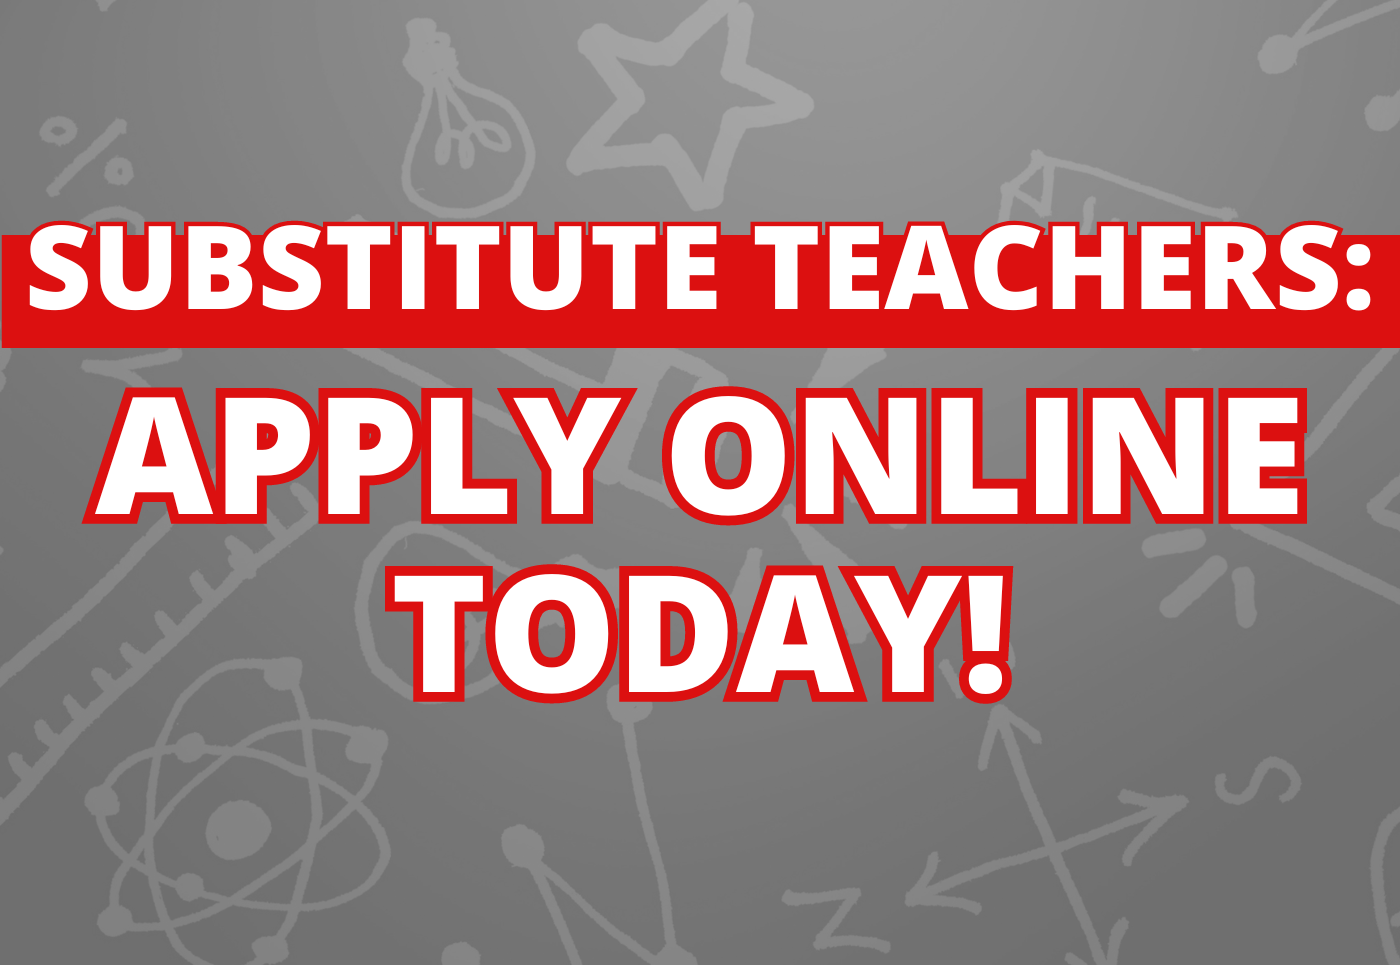 SUBSTITUTE TEACHERS: APPLY ONLINE TODAY